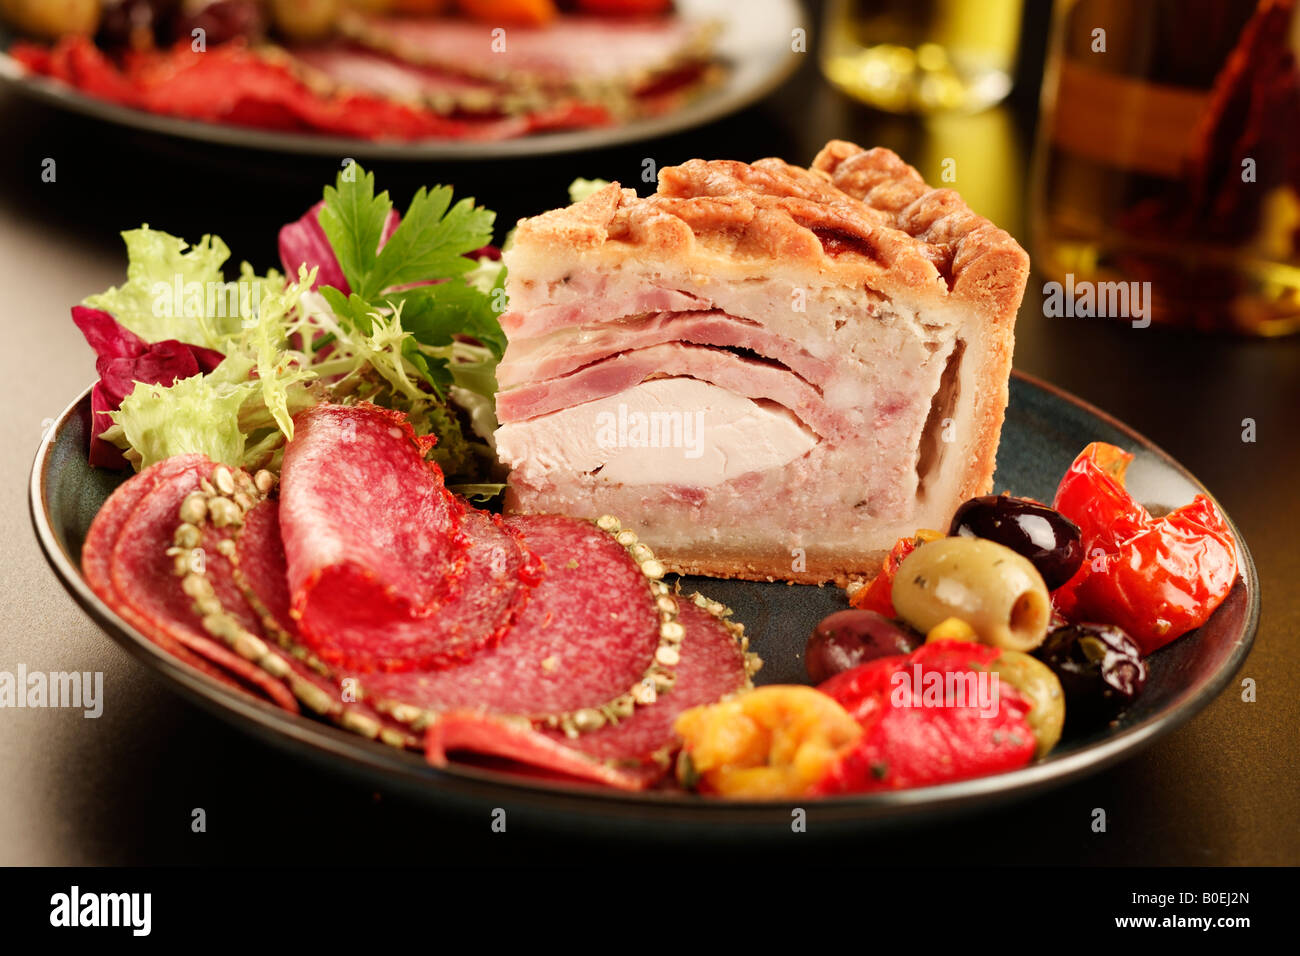 MEAT PIE WITH DELI MEATS AND VEGETABLES Stock Photo